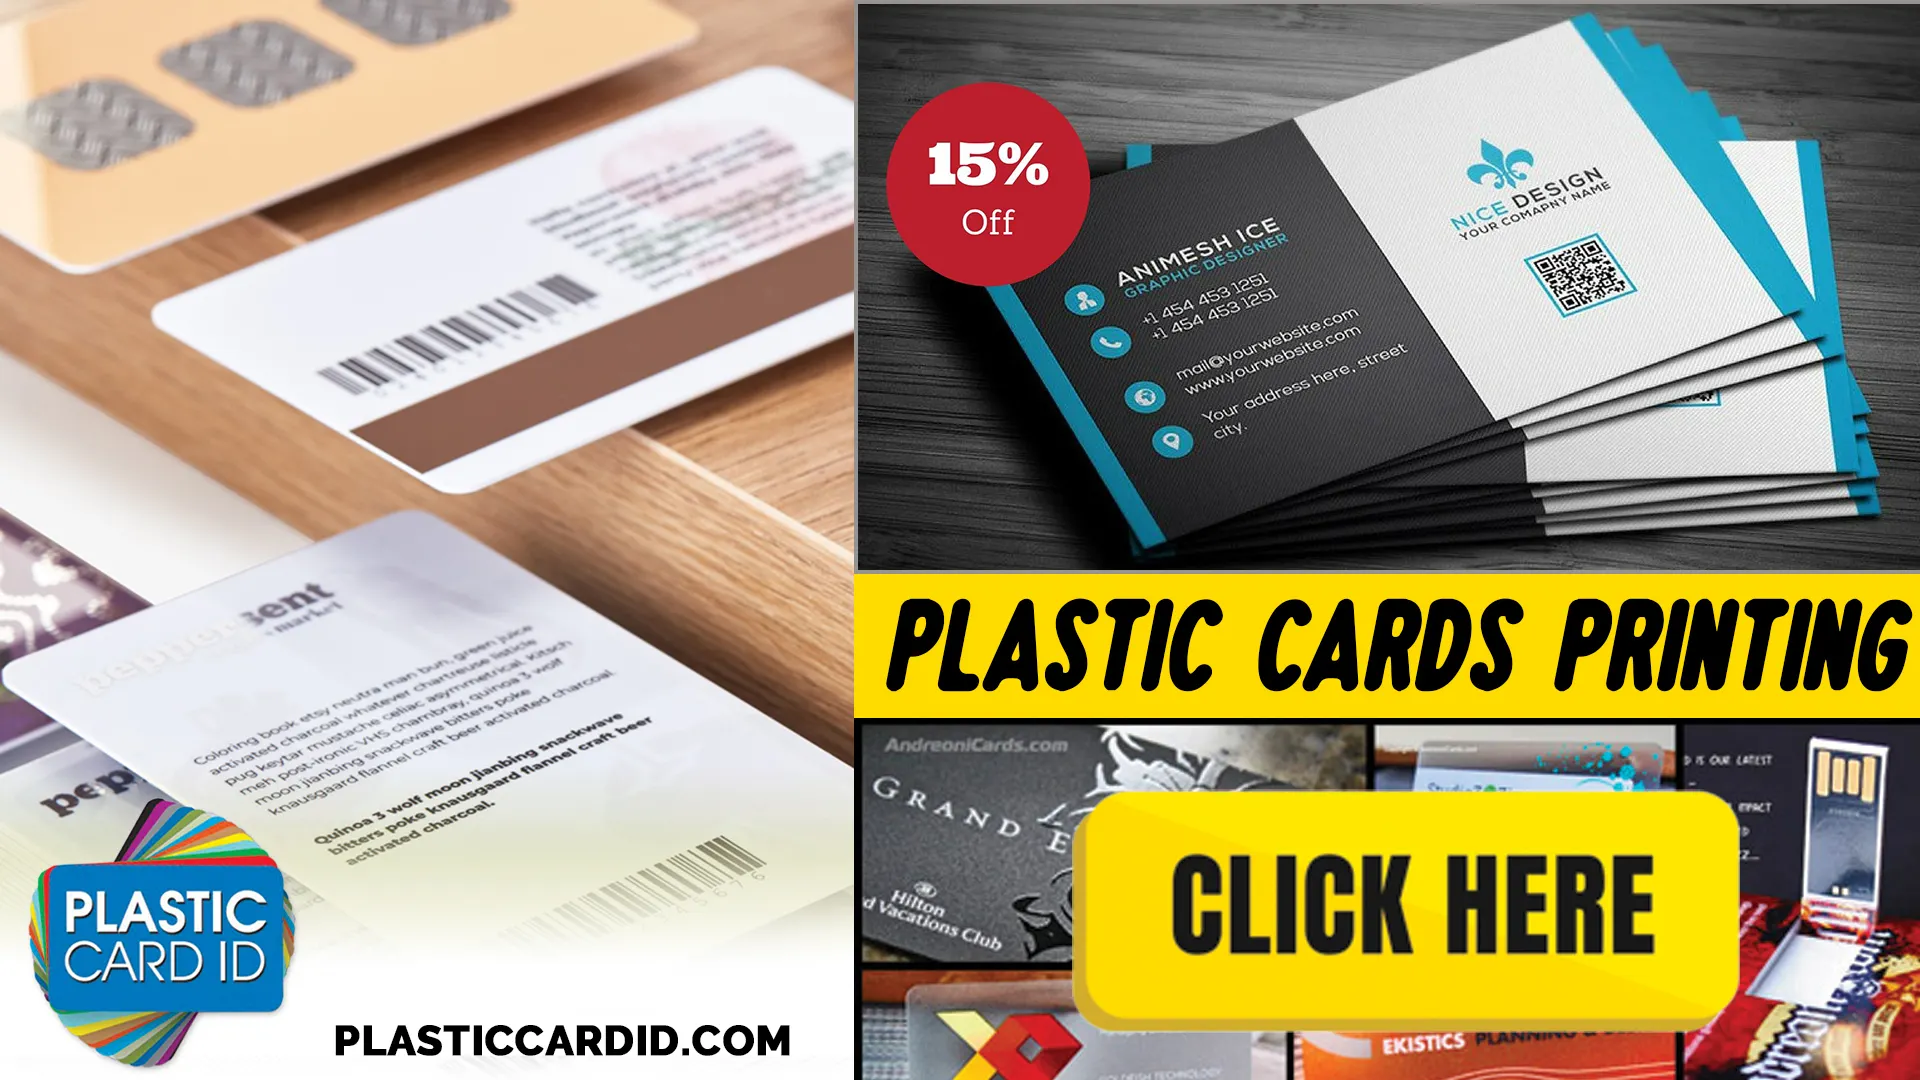 Myth: Plastic Cards are Bad for the Environment